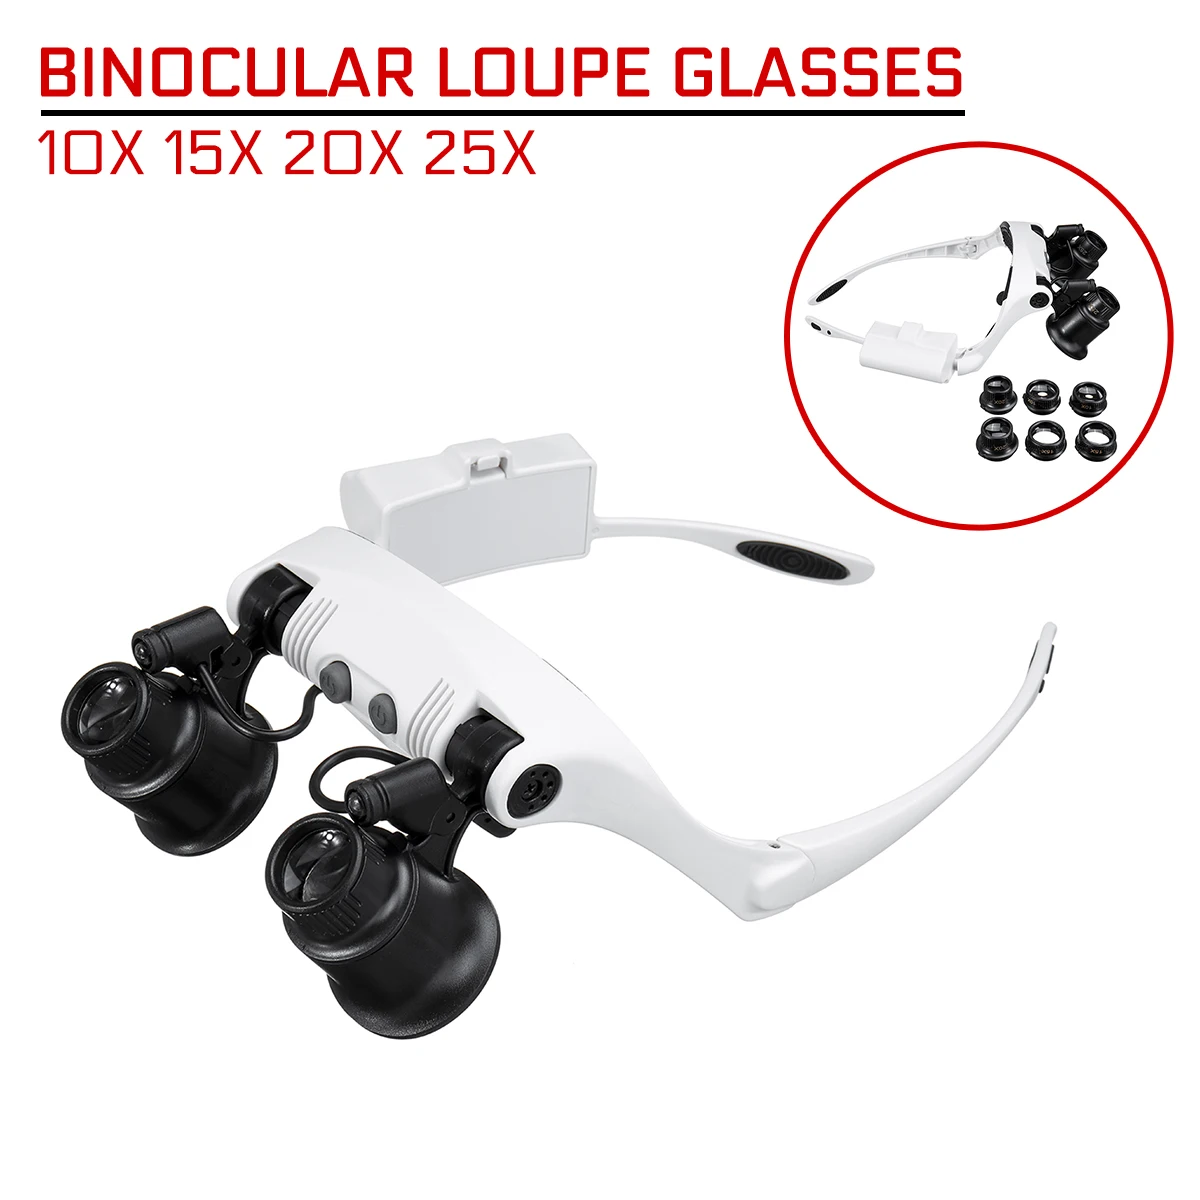 LED Magnifier 10X 15X 20X 25X Double Eye Glasses Loupe Lens Professional Jeweler Watch Repair Measurement with 8 Lens LED Lamp